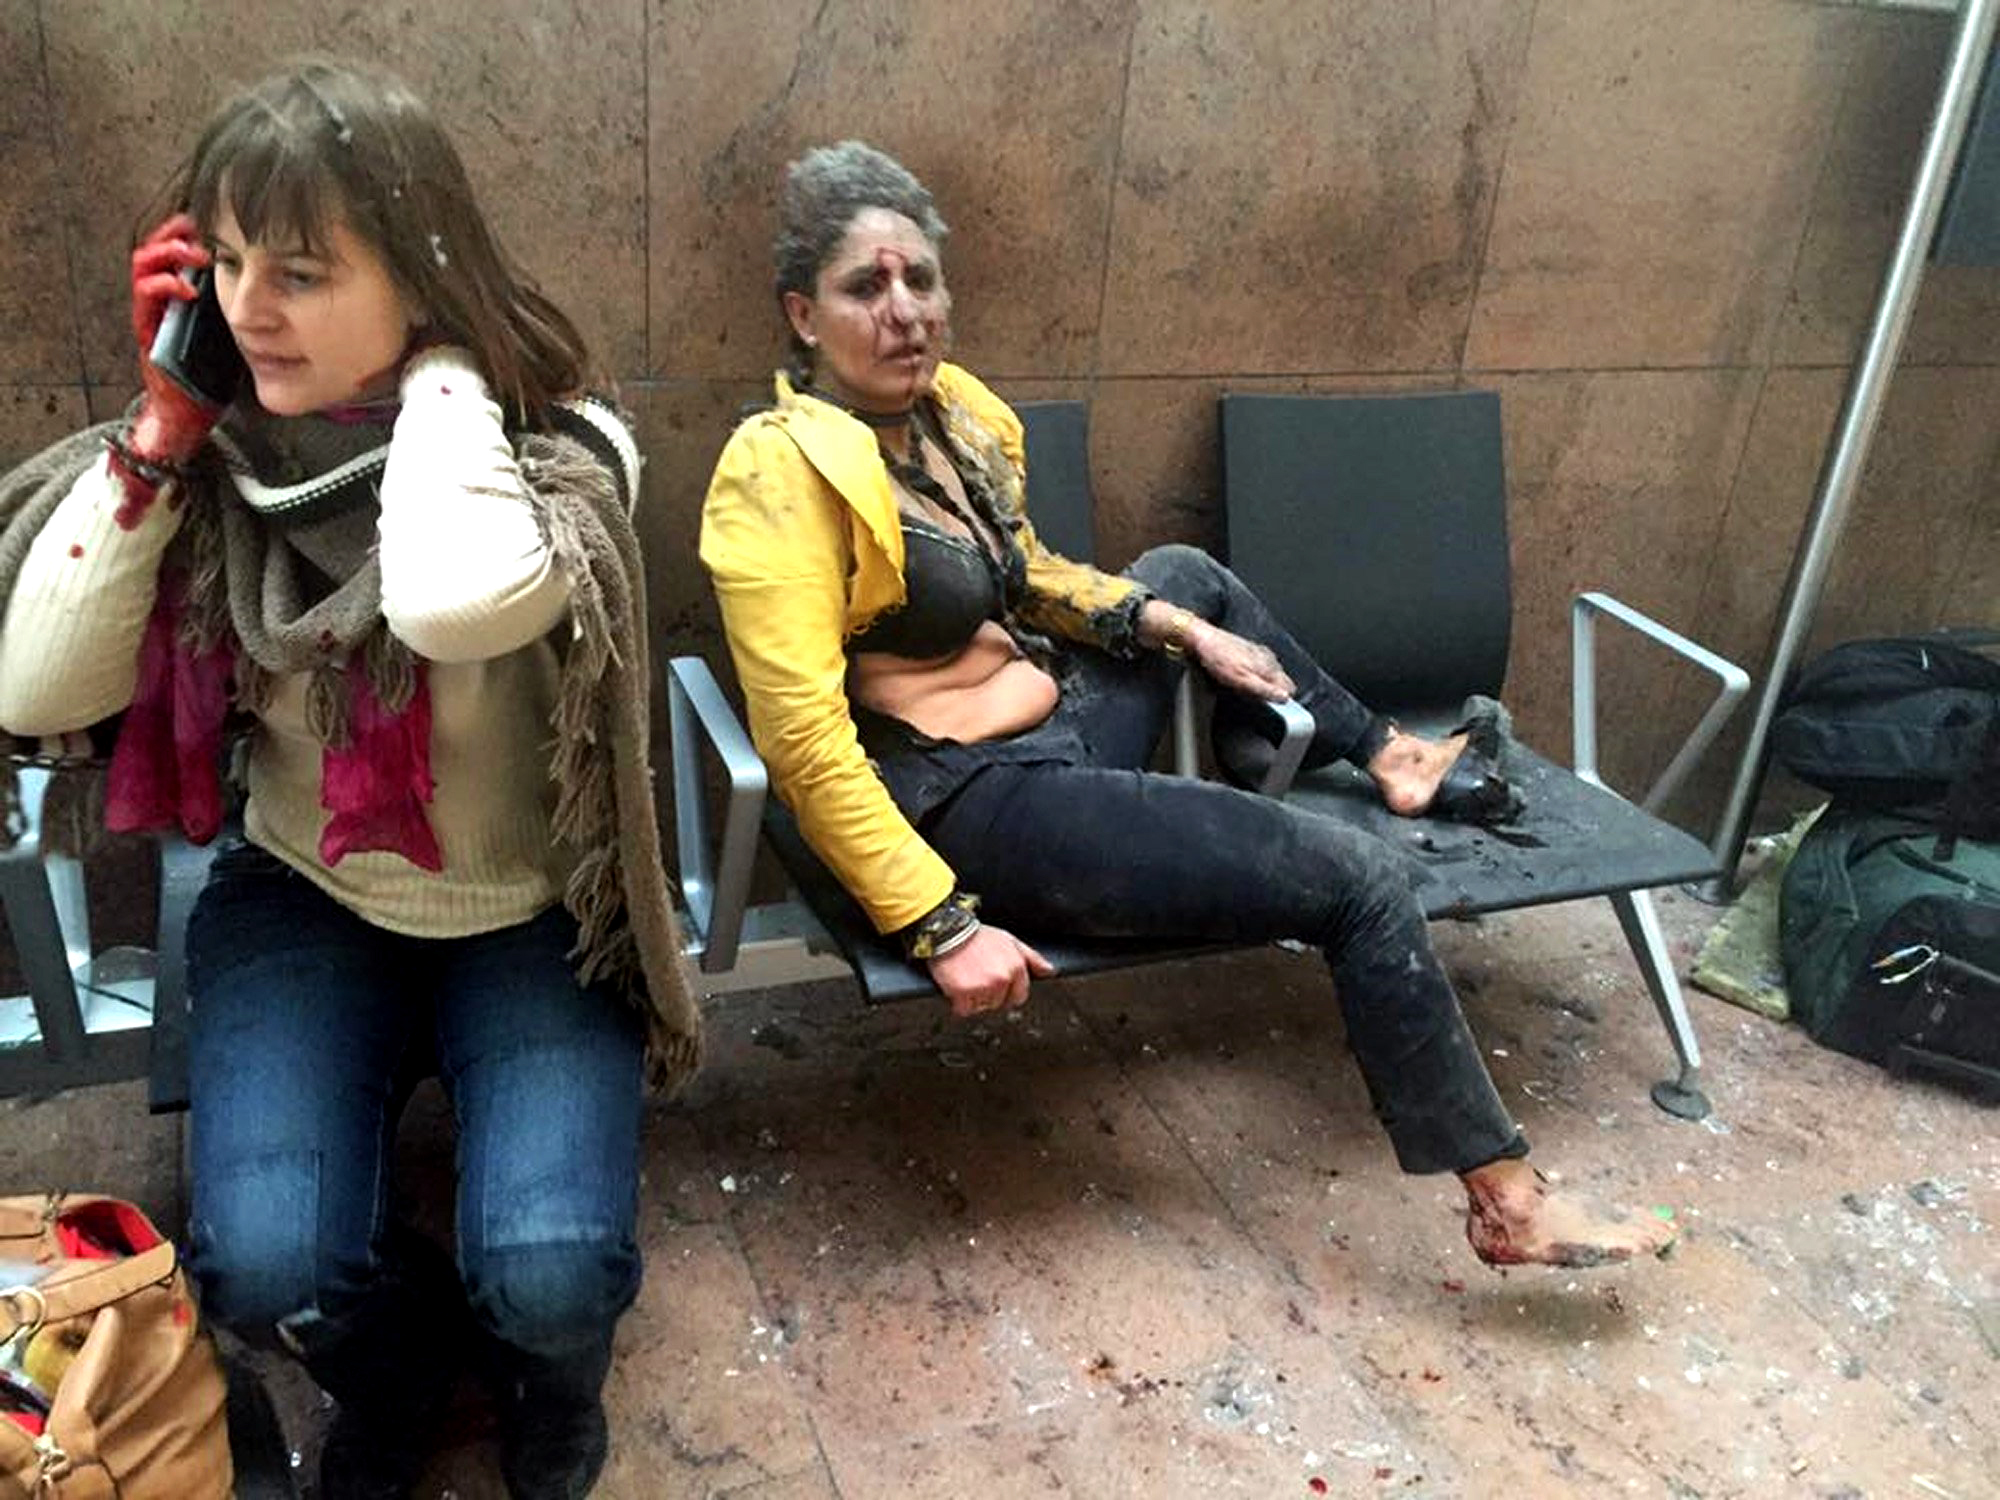 In this photo provided by Georgian Public Broadcaster and photographed by Ketevan Kardava, two women are wounded in Brussels Airport in Belgium after explosions were heard on March 22, 2016. (Ketevan Kardava—Georgian Public Broadcaster/AP)